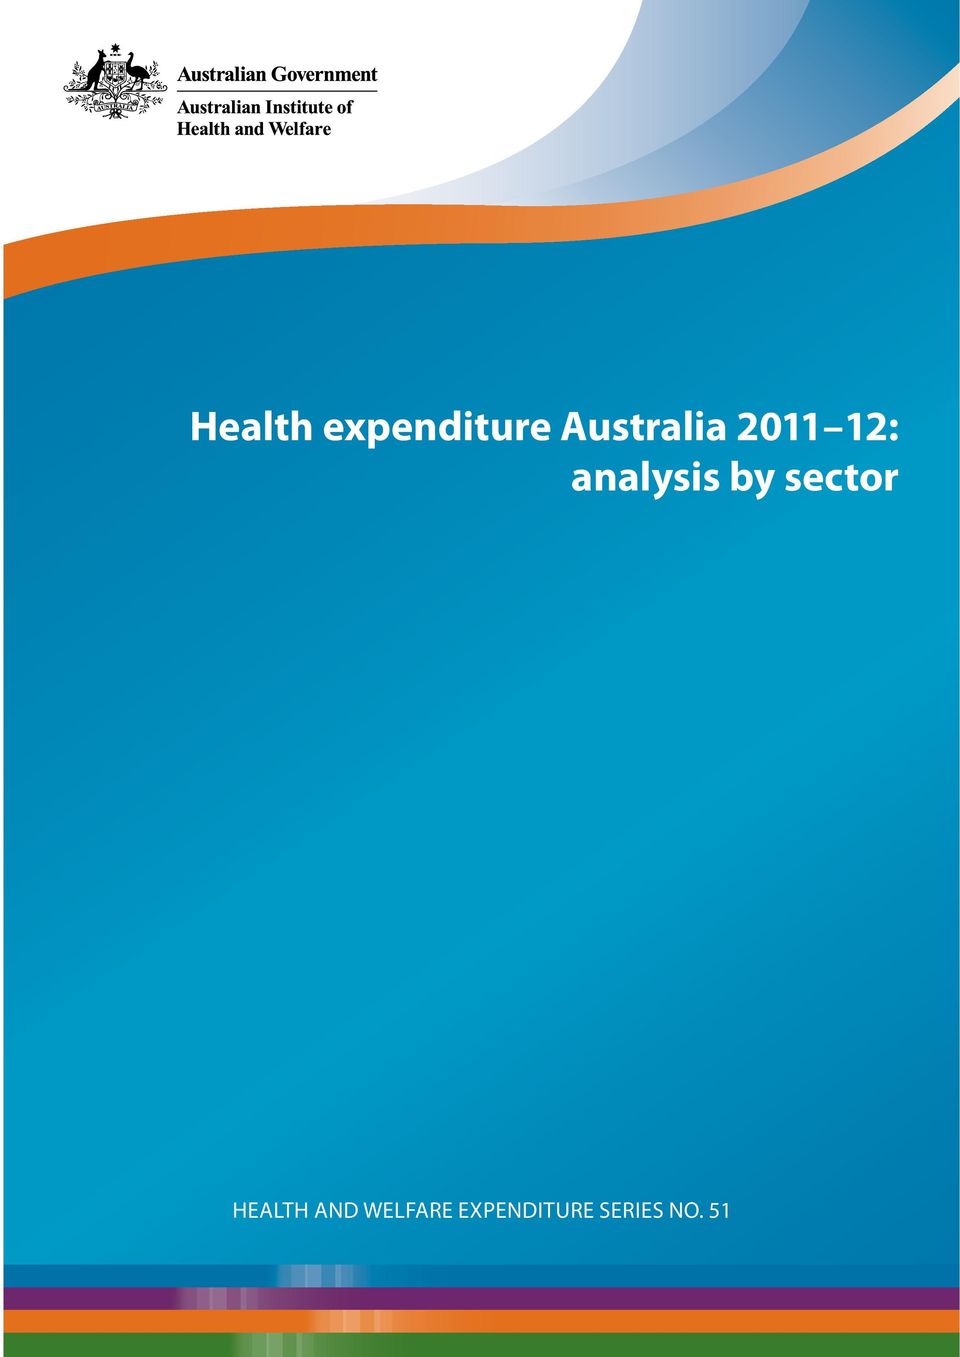 analysis by sector HEALTH